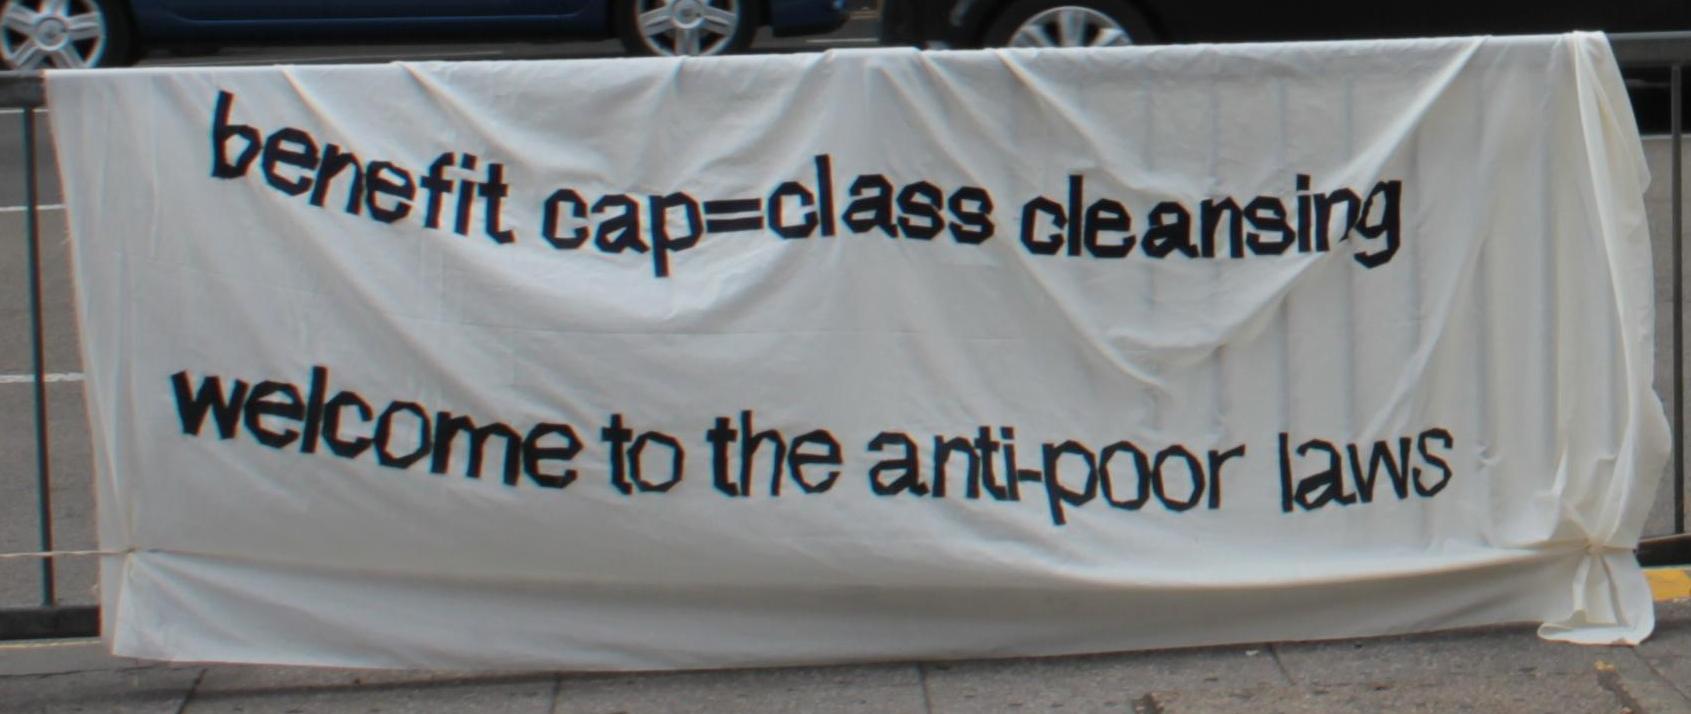 Benefit cap equals class cleansing